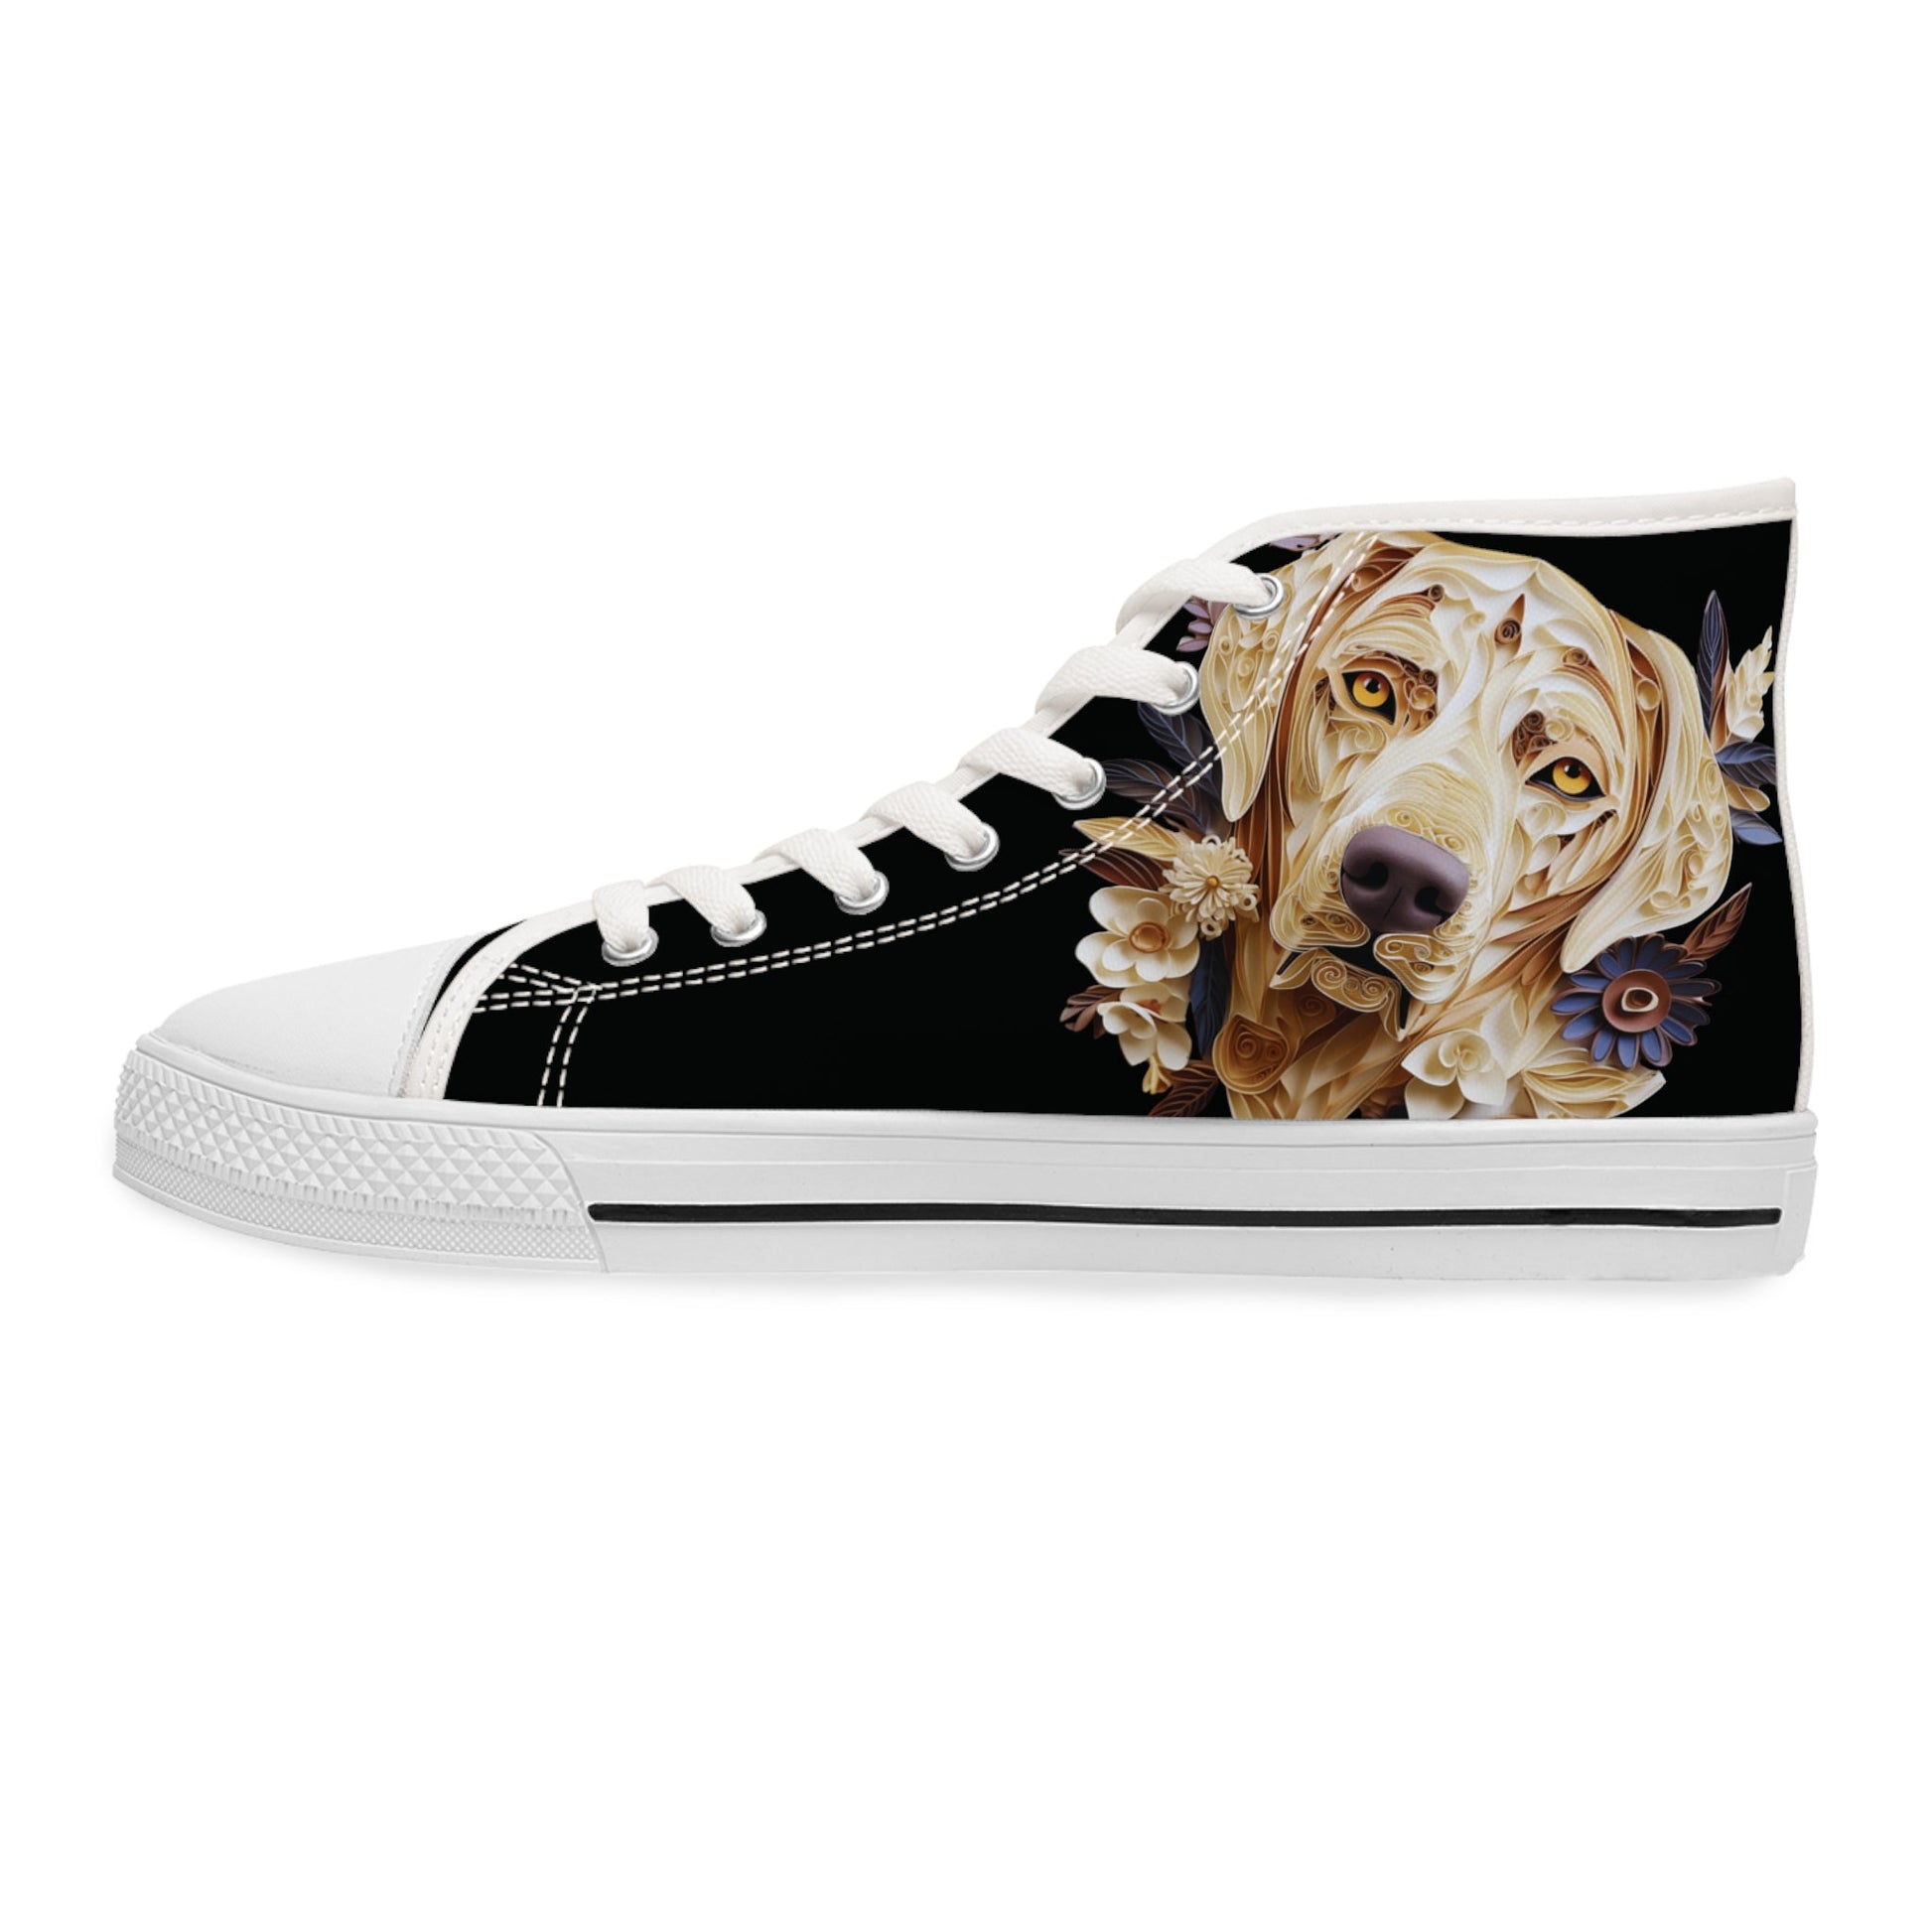 Women's High-Top Trainers featuring a Labrador Paper Quilling Effect Design - Hobbster